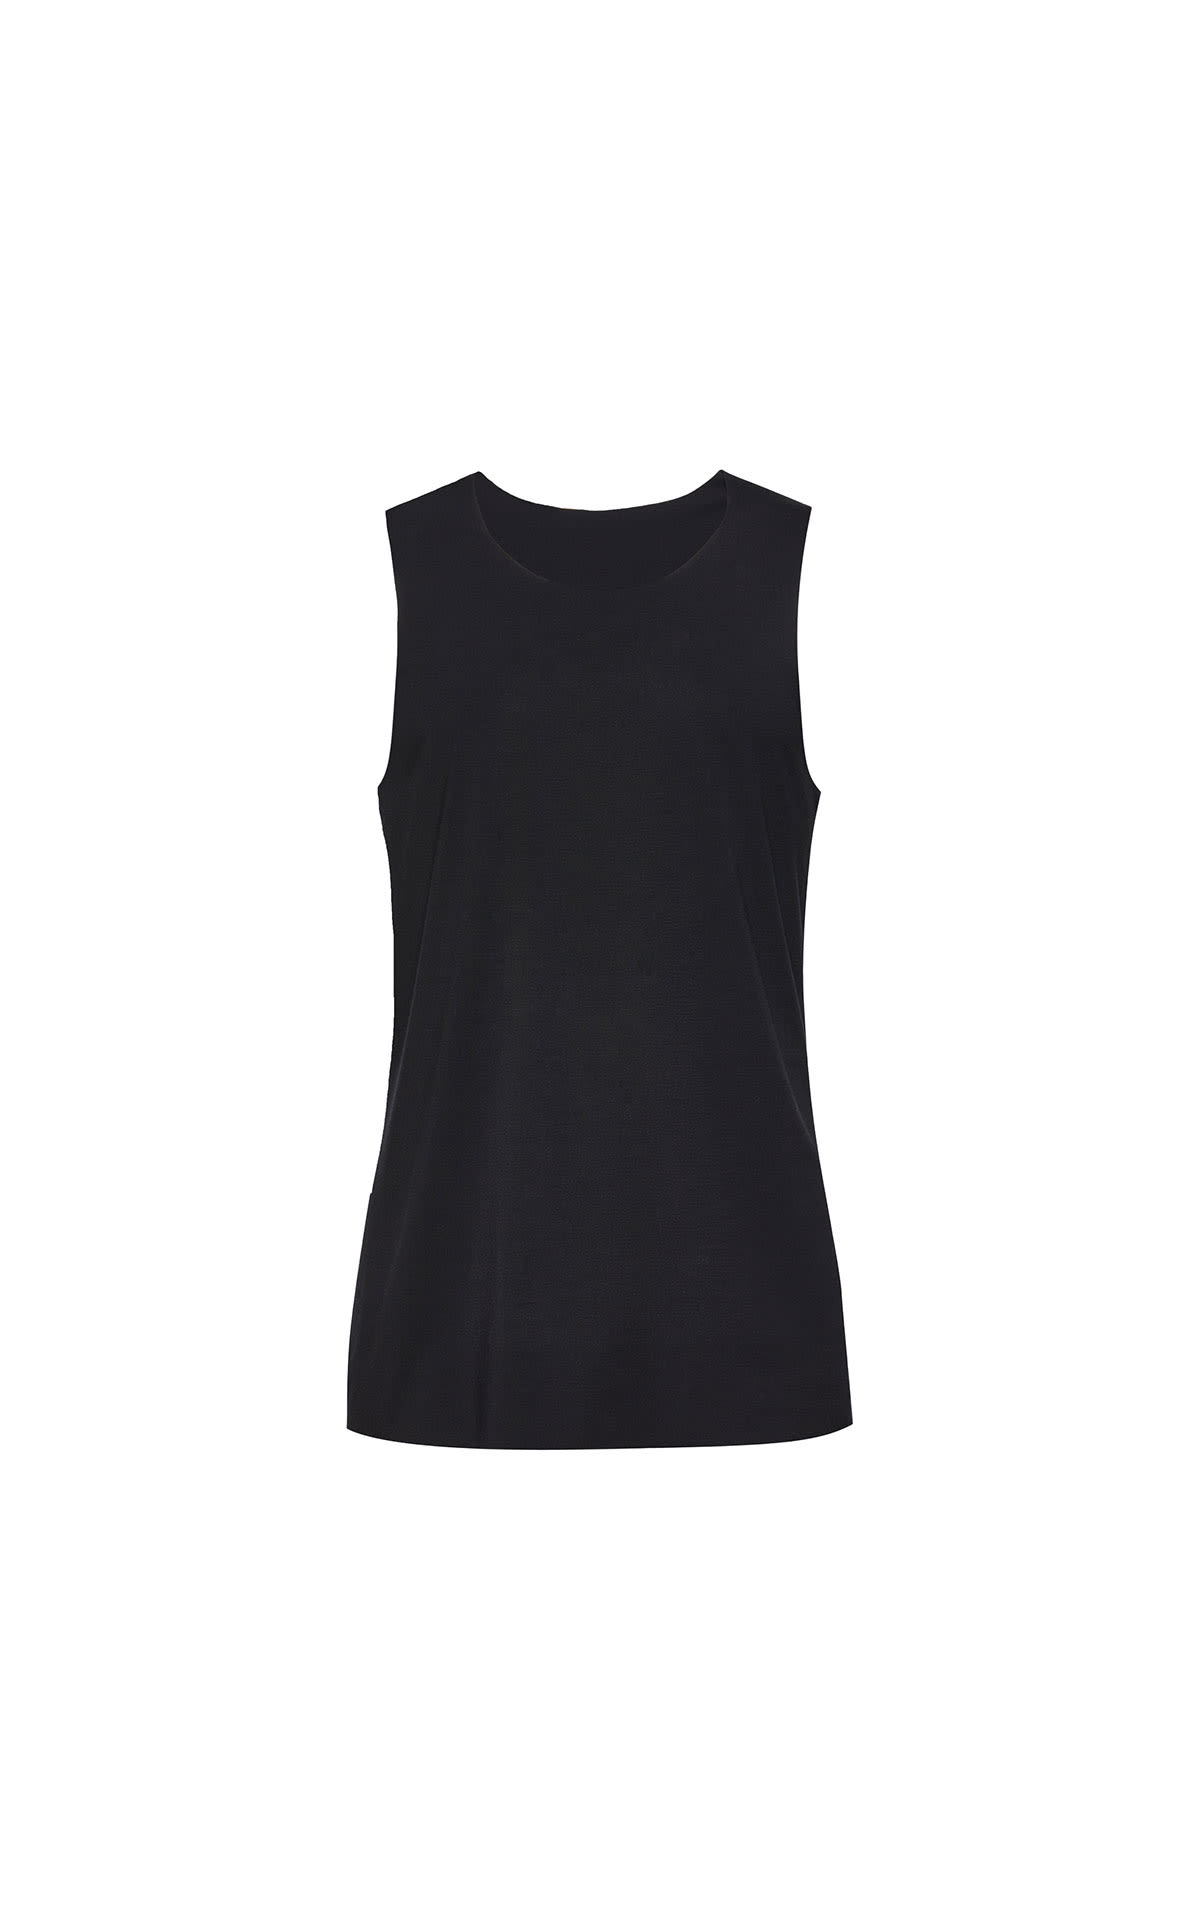 Wolford Men’s pure tank top from Bicester Village